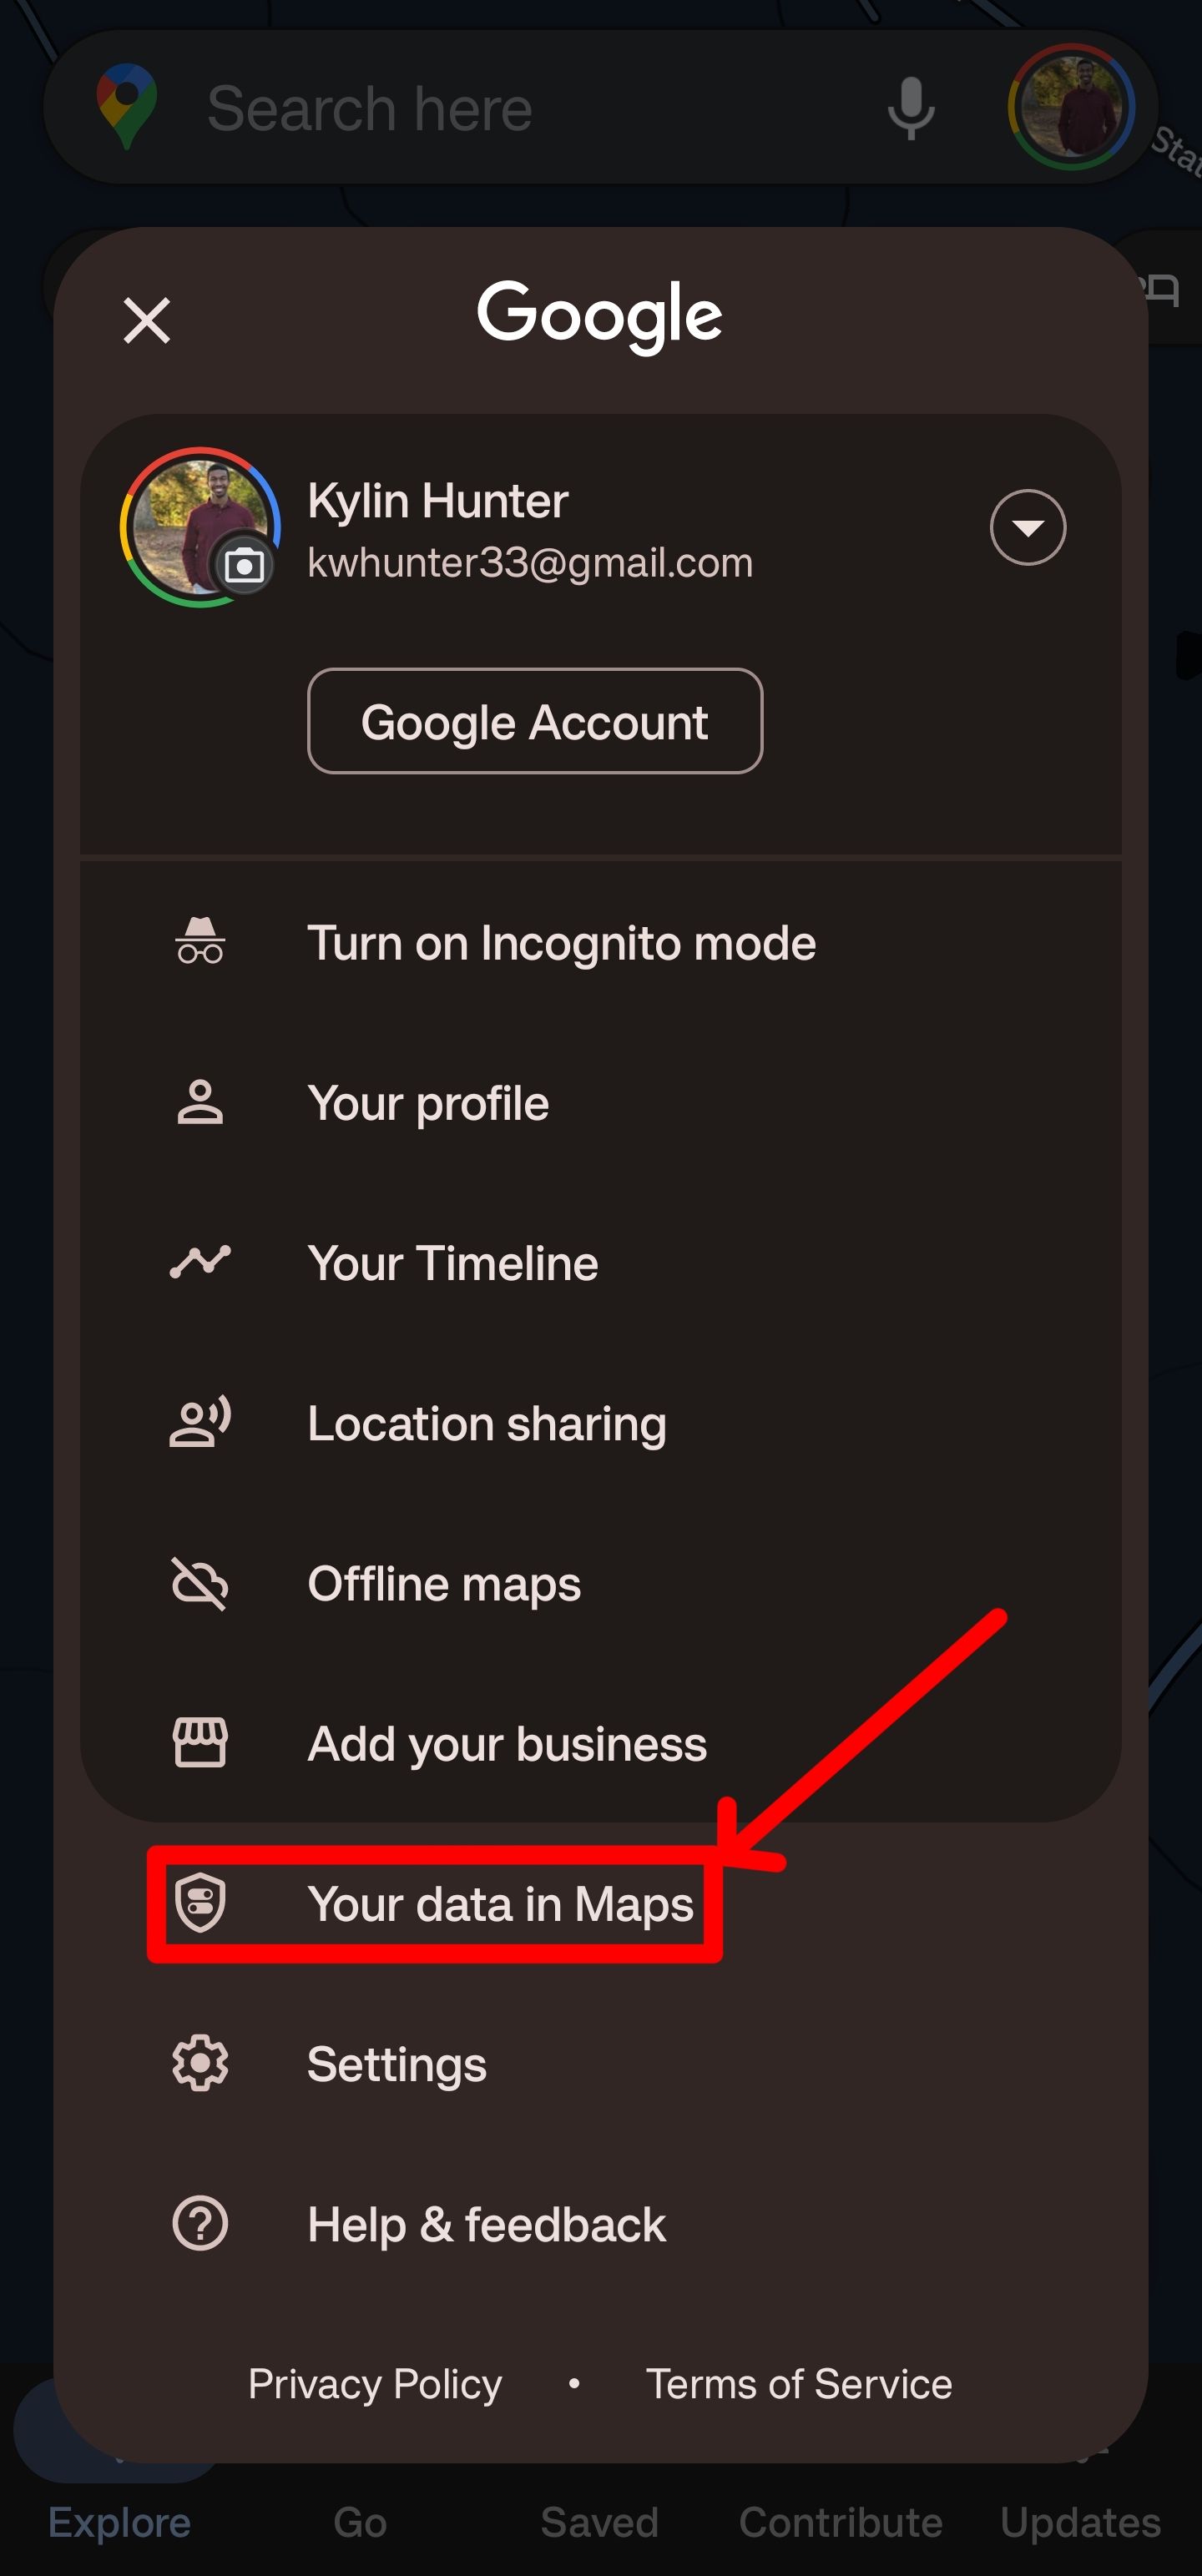 Click on your data in maps to access the location history.